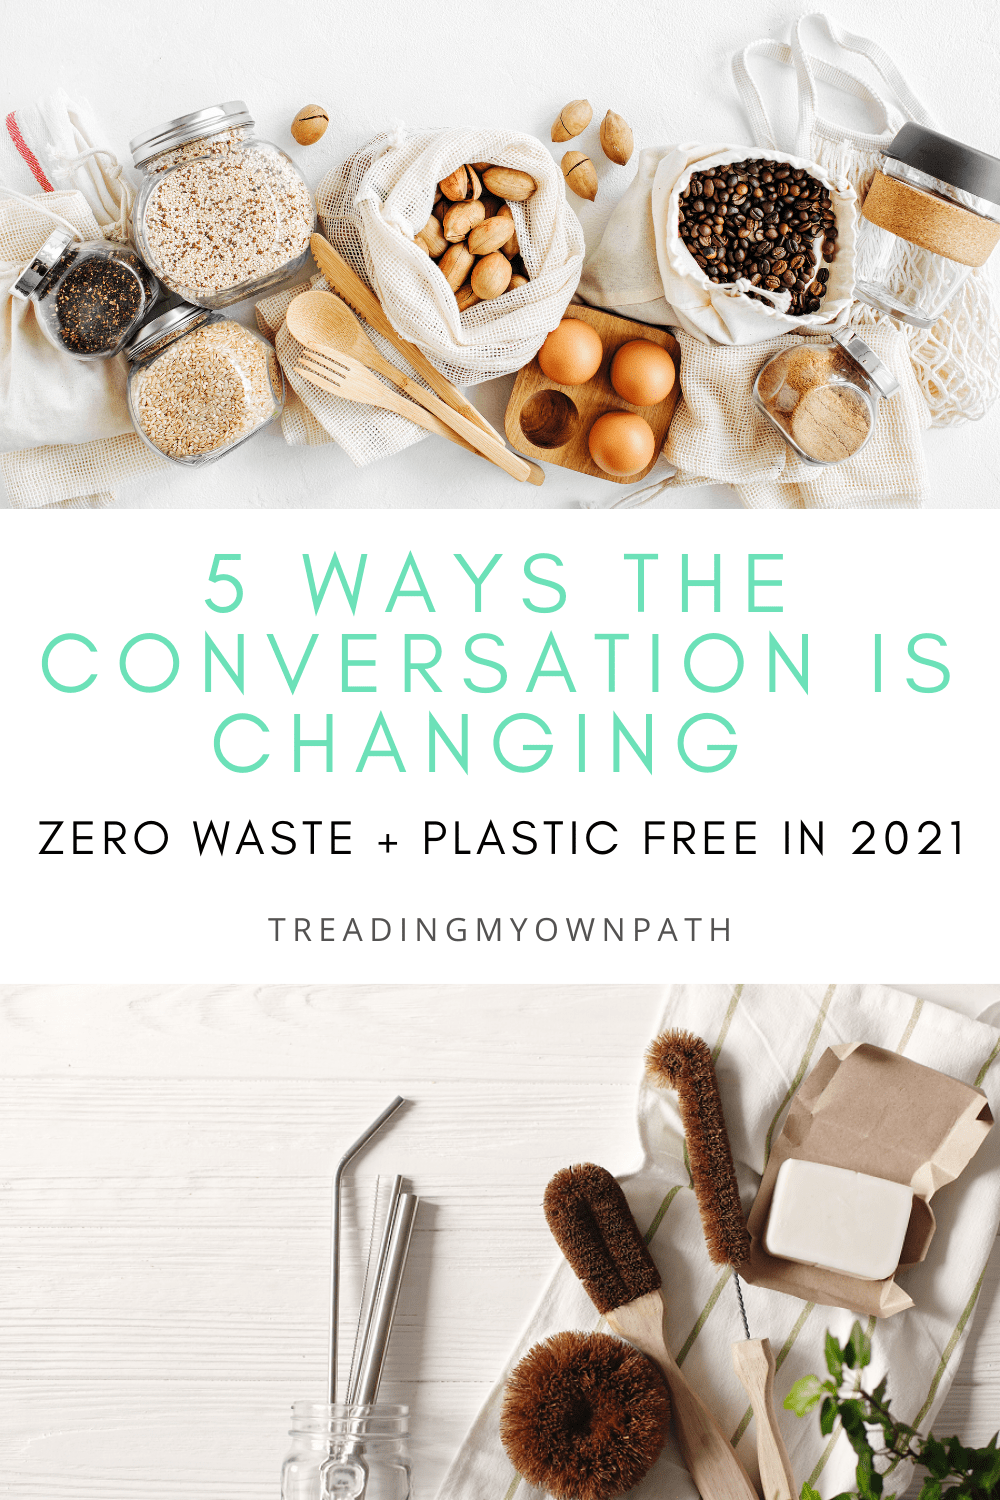 5 ways the zero waste / plastic-free conversation is changing in 2021